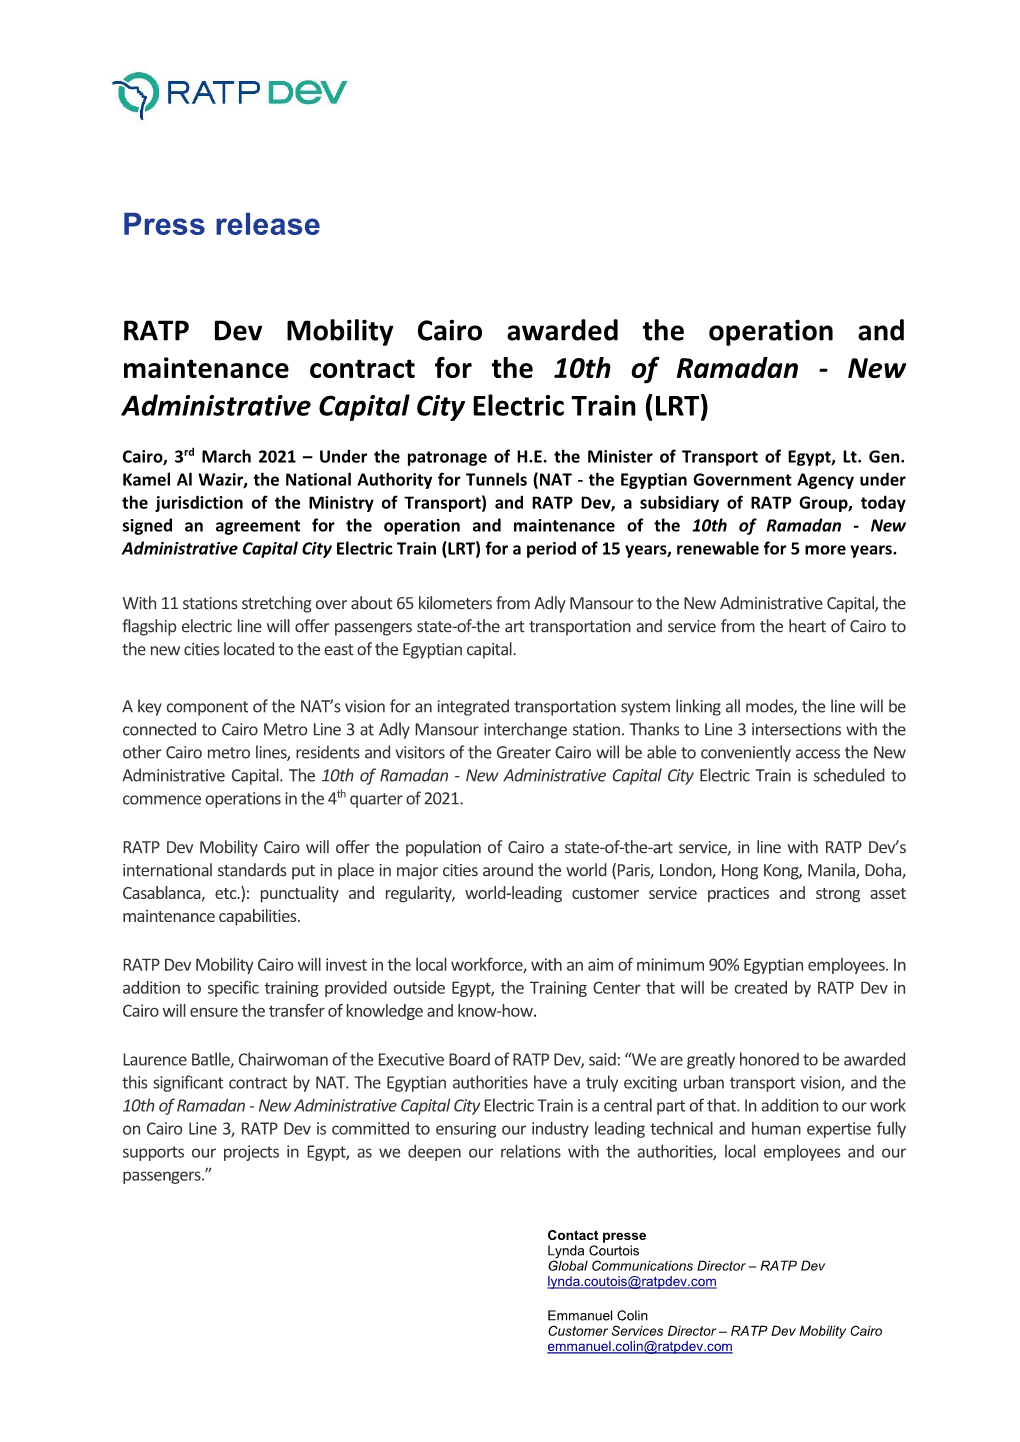 Press Release RATP Dev Mobility Cairo Awarded the Operation And